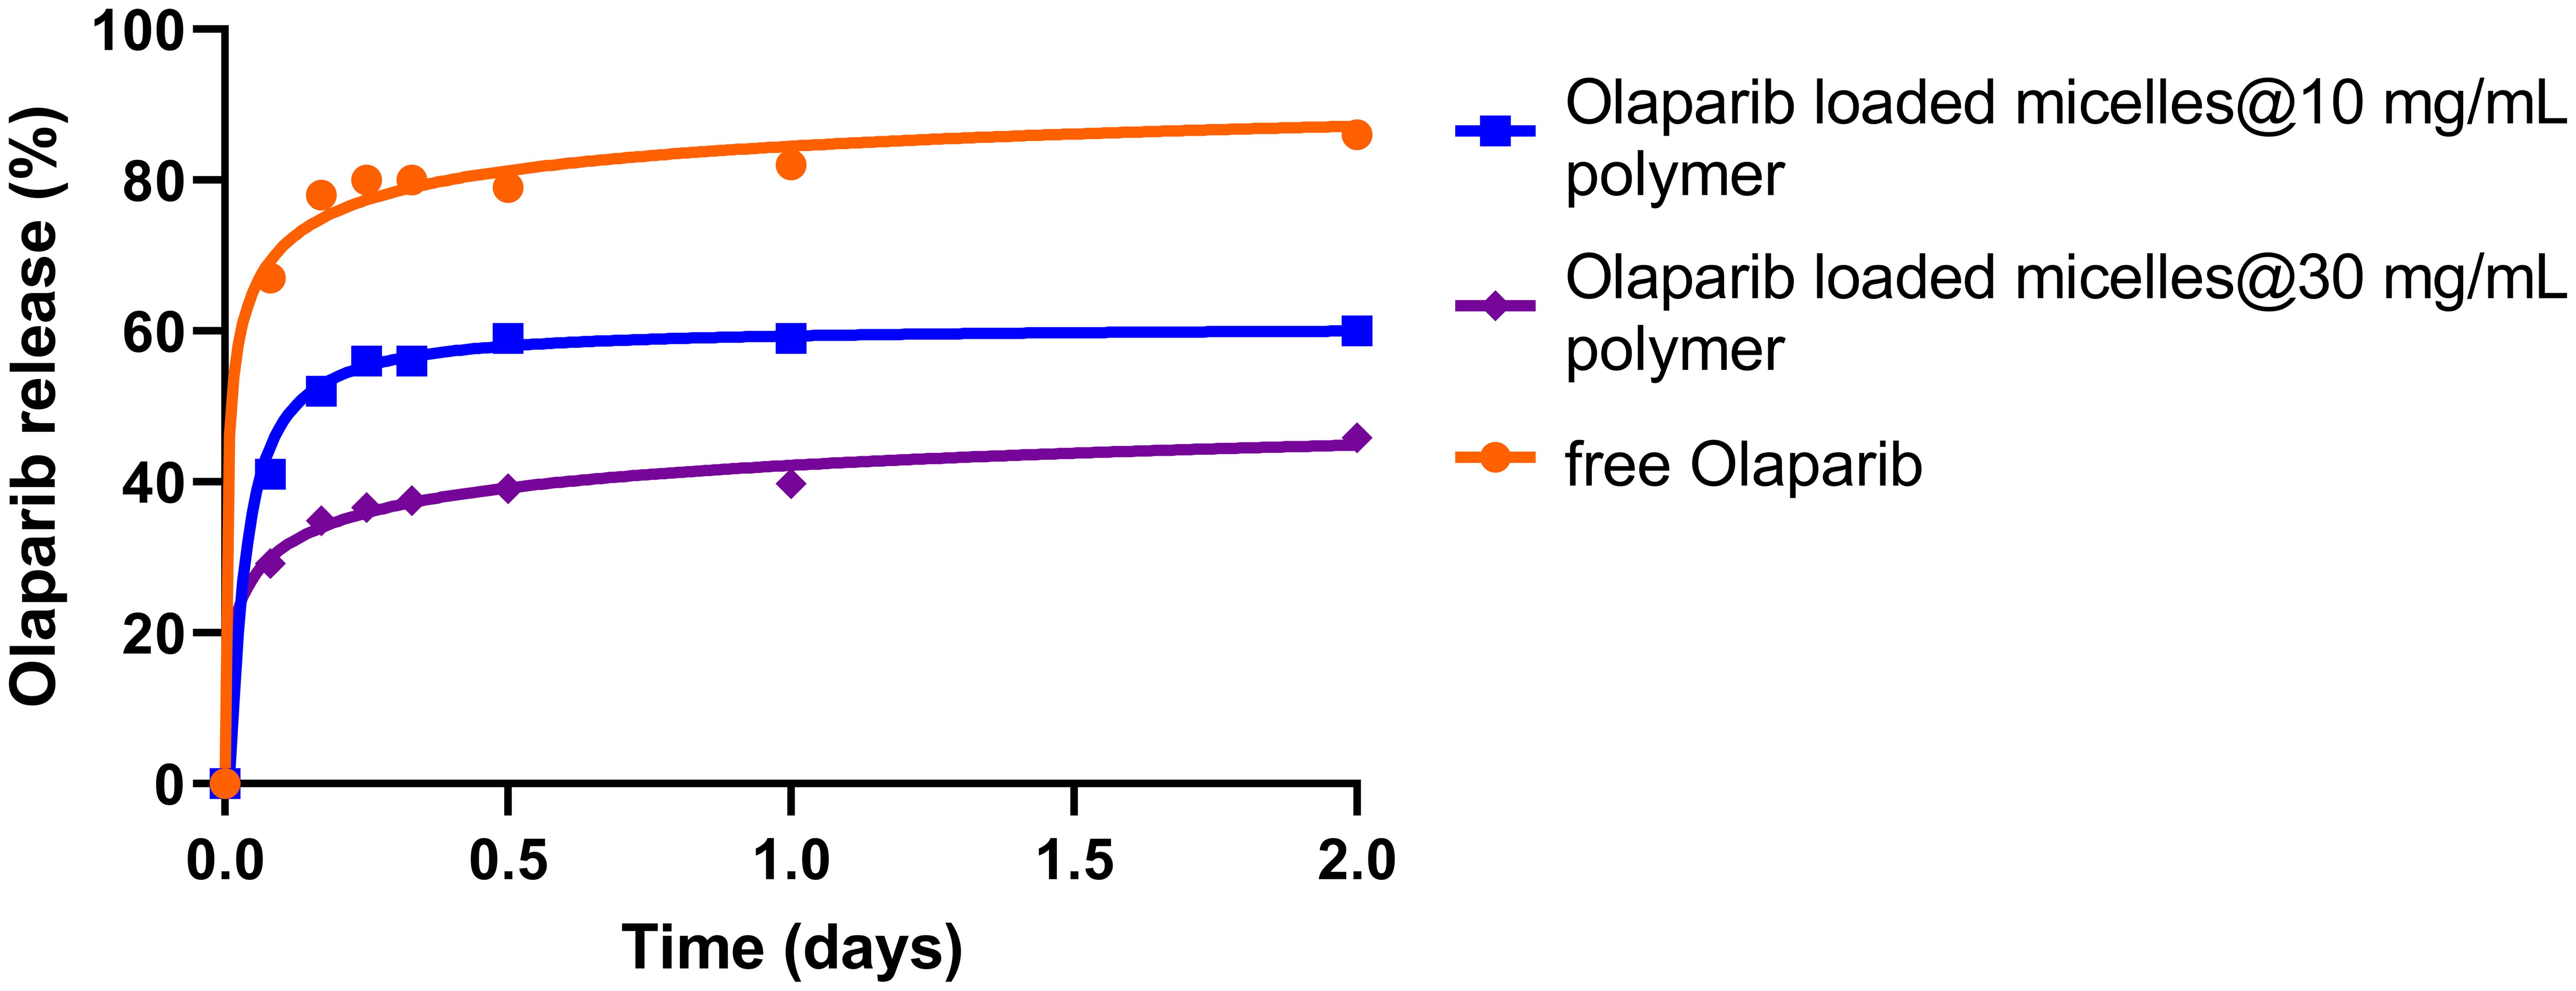 Release profiles of olaparib-loaded polymer micelles and free olaparib obtained in PBS (pH 7.4) supplied with 0.5% Tween-80 at 37°C.